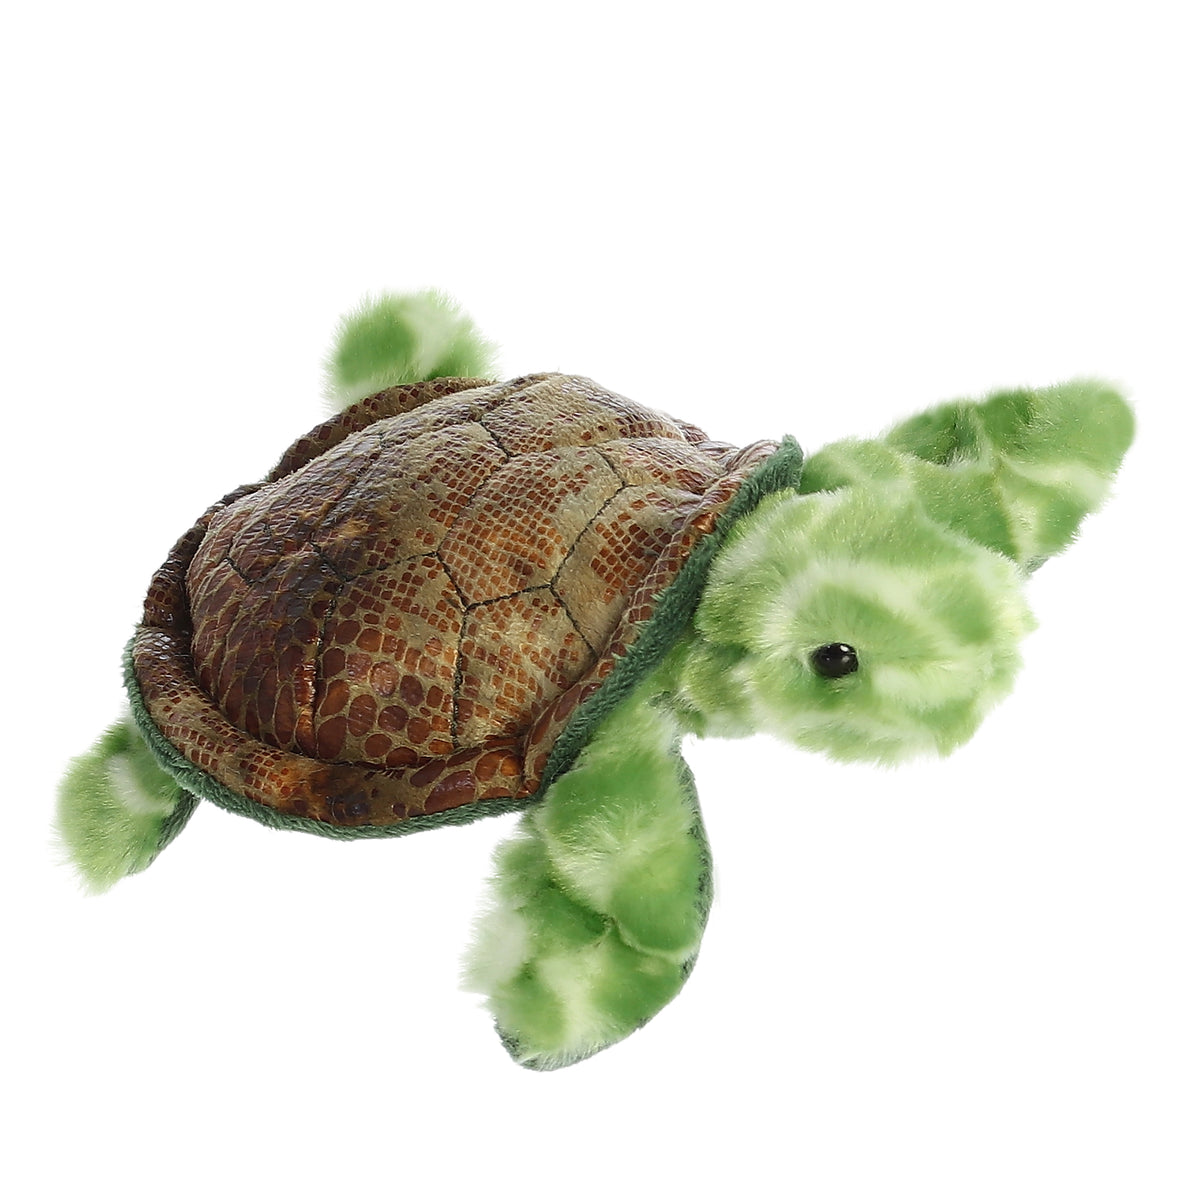 Adorable Splish Sea Turtle stuffed plush in gentle green and brown, resembling the real animal, ready for ocean exploration!